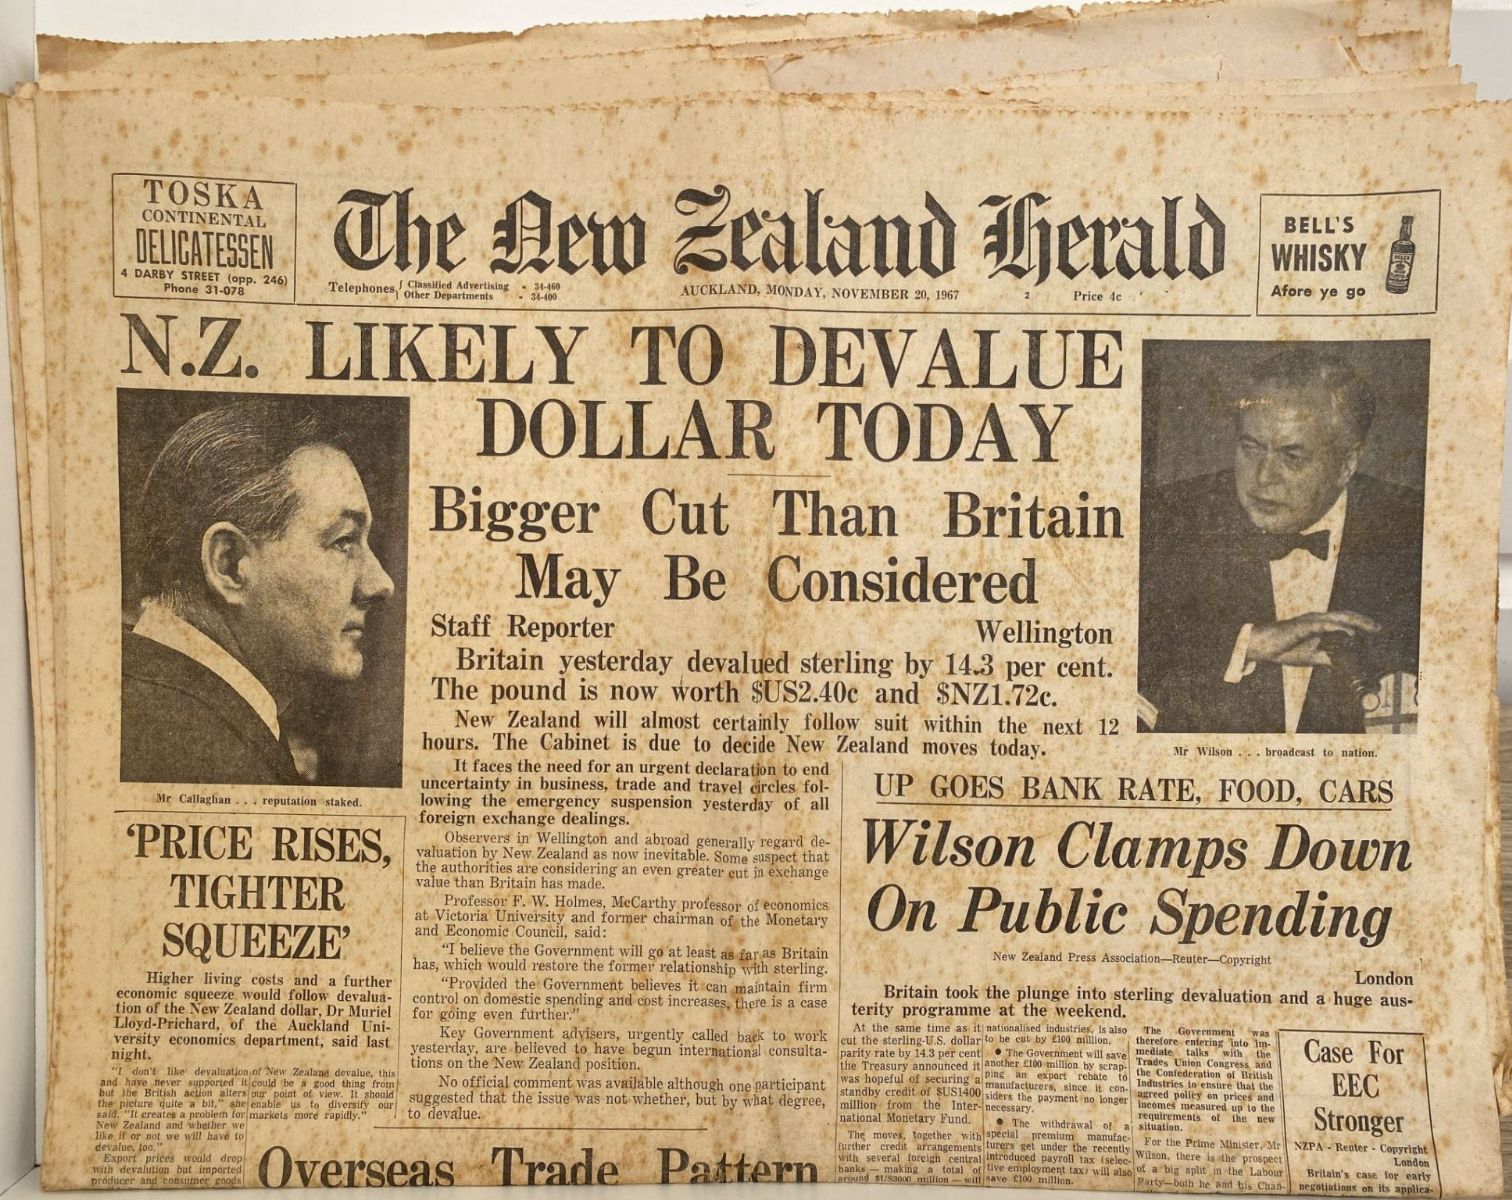 OLD NEWSPAPER: The New Zealand Herald - 20th November 1967